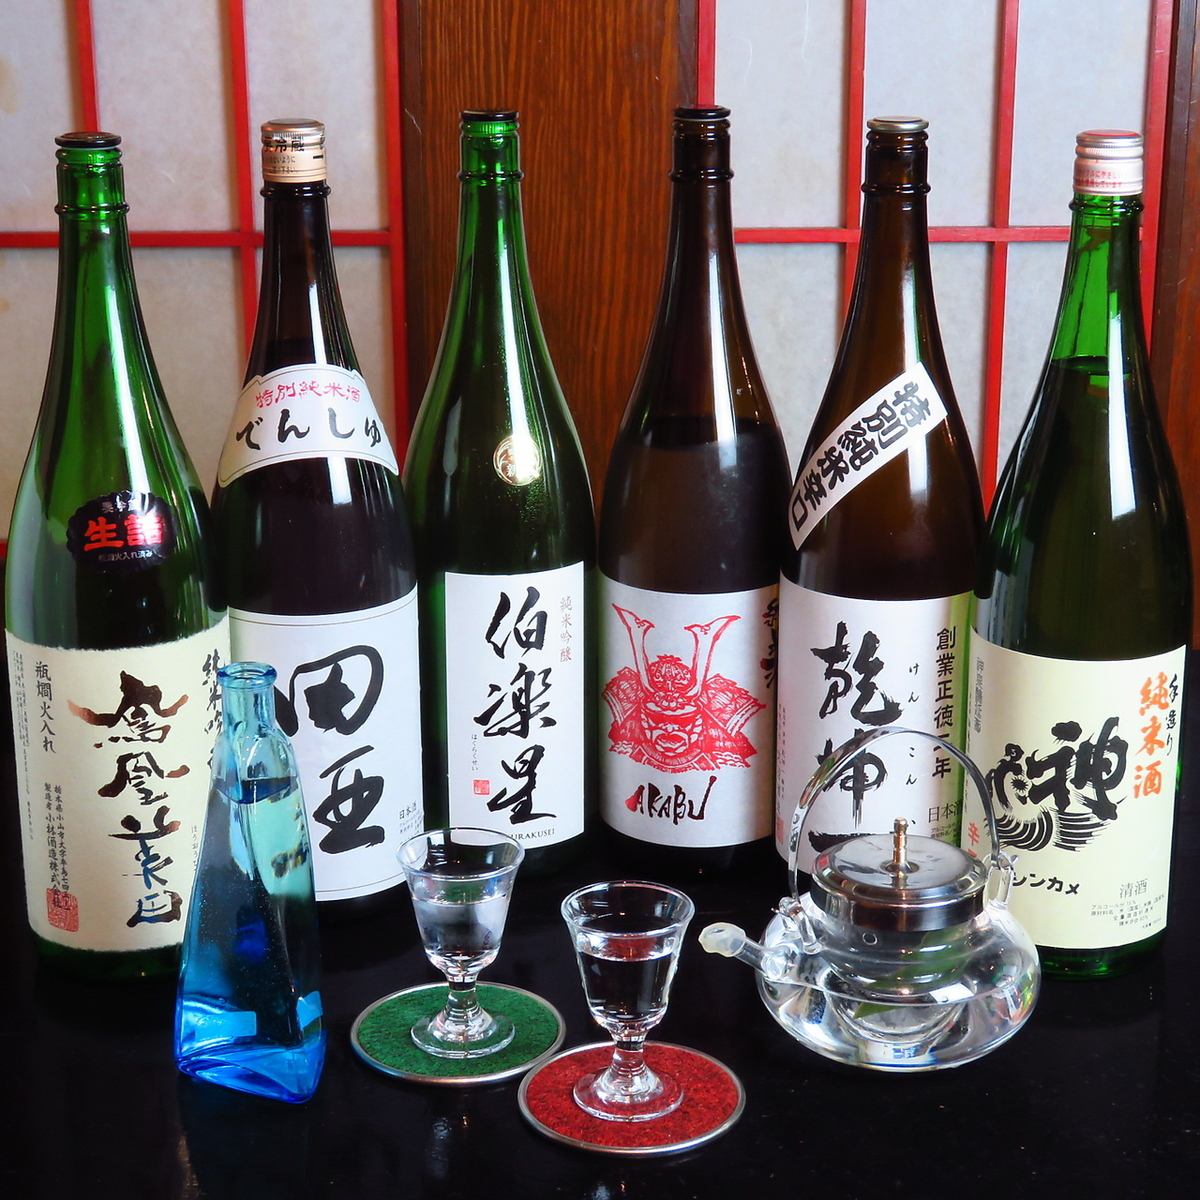 You can enjoy local sake and sake from all over the country!